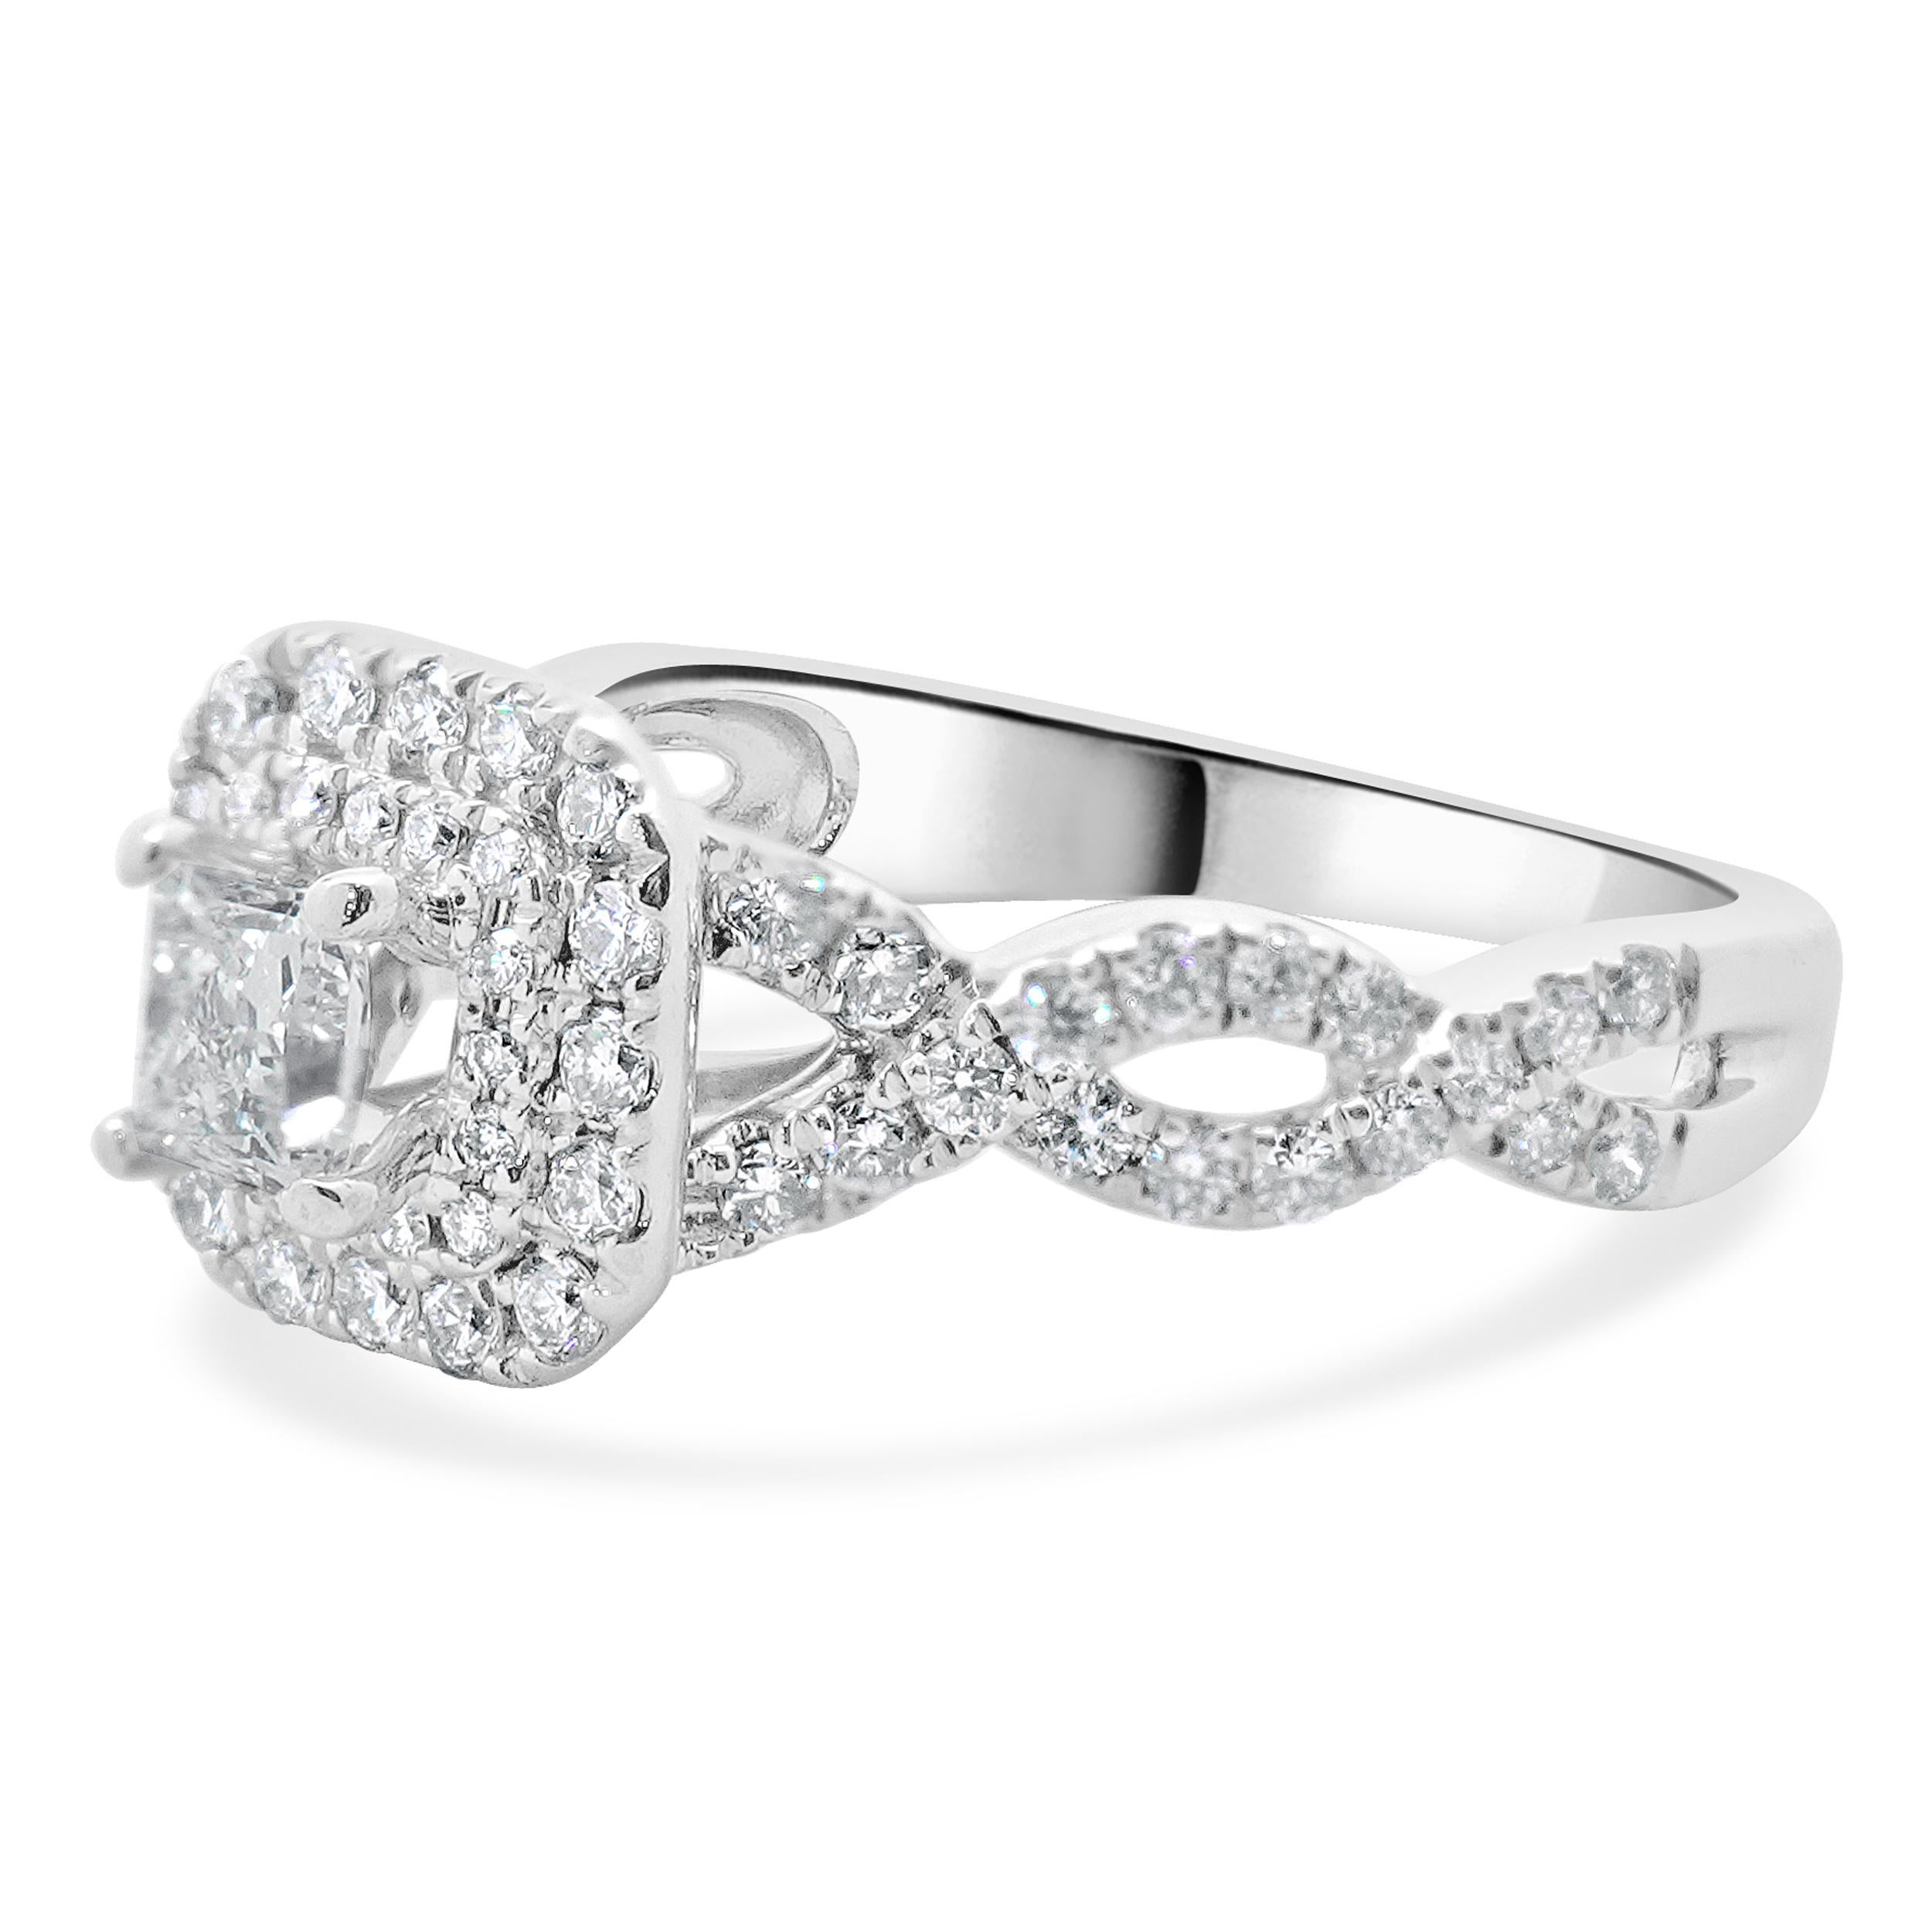 Designer: Vera Wang
Material: 14K white gold
Diamond: 1 princess cut = 0.36ct
Color: G
Clarity: SI1
Diamond: 69 round brilliant cut = 0.57cttw
Color: G
Clarity: SI1
Dimensions: ring top measures 9.37 mm wide
Ring Size: 6.25 (complimentary sizing